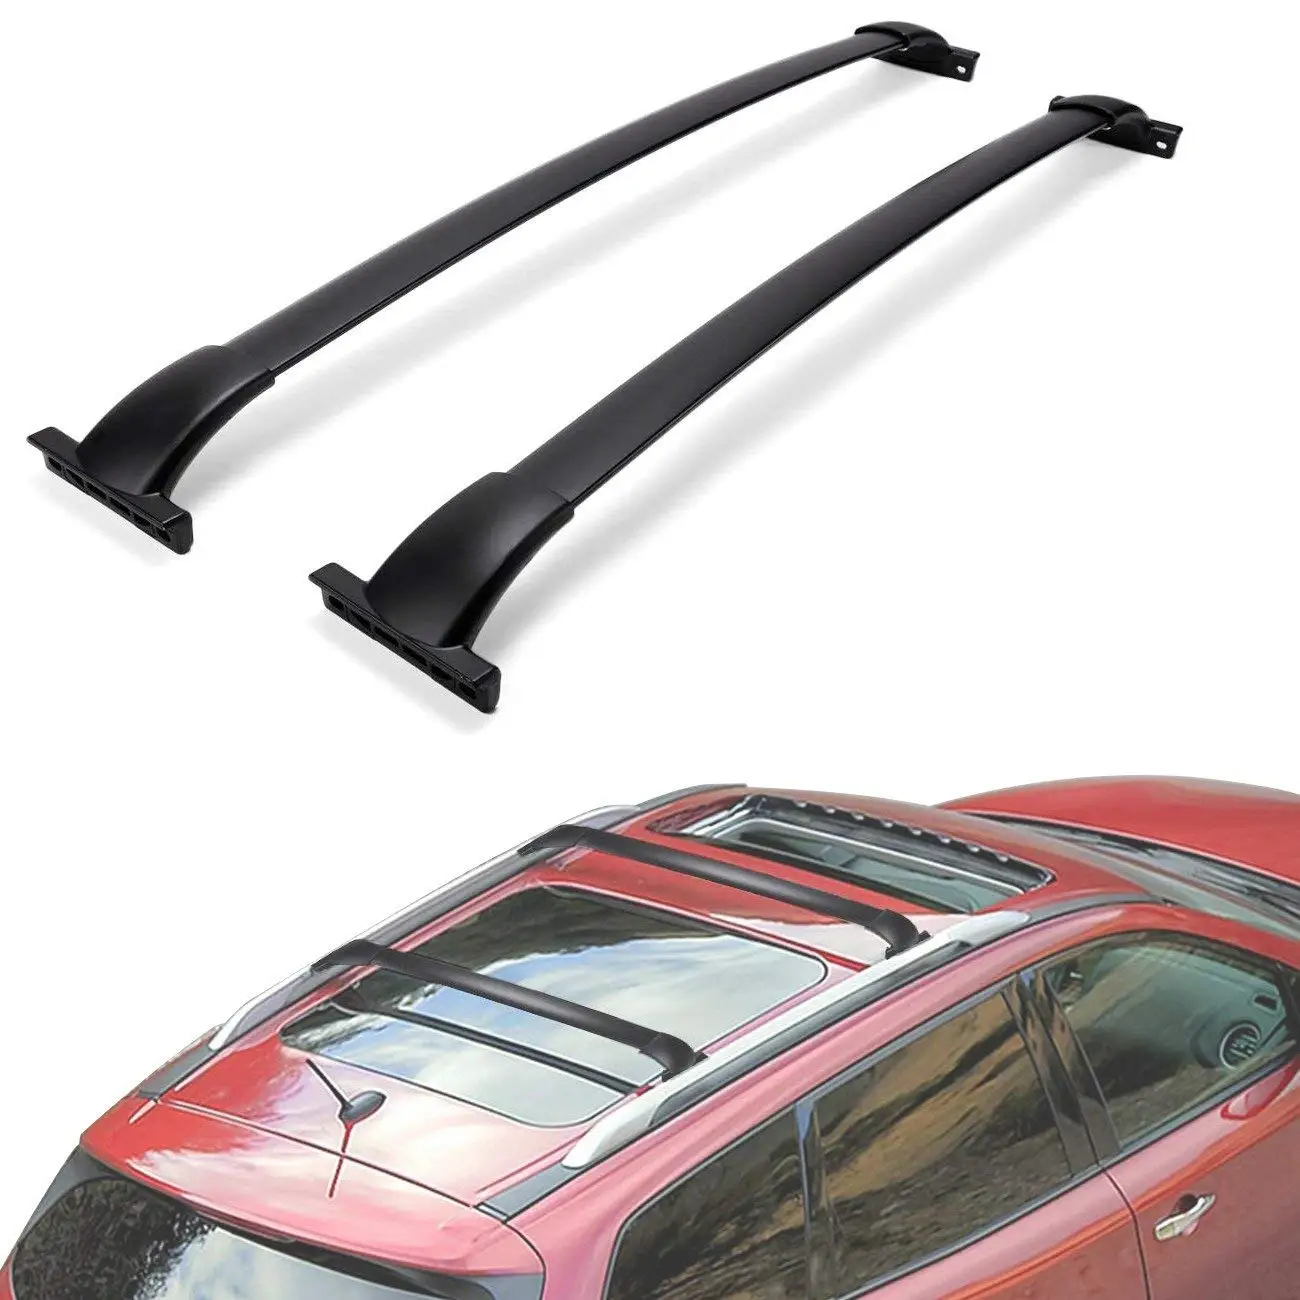 AUTEX Bolt-On Aluminum Roof Rack Cross Bars Compatible with Nissan Pathfinder 2013 2014 2015 2016 2017 Roof Rack Luggage Carrier Crossbar Roof Top Rail Rack